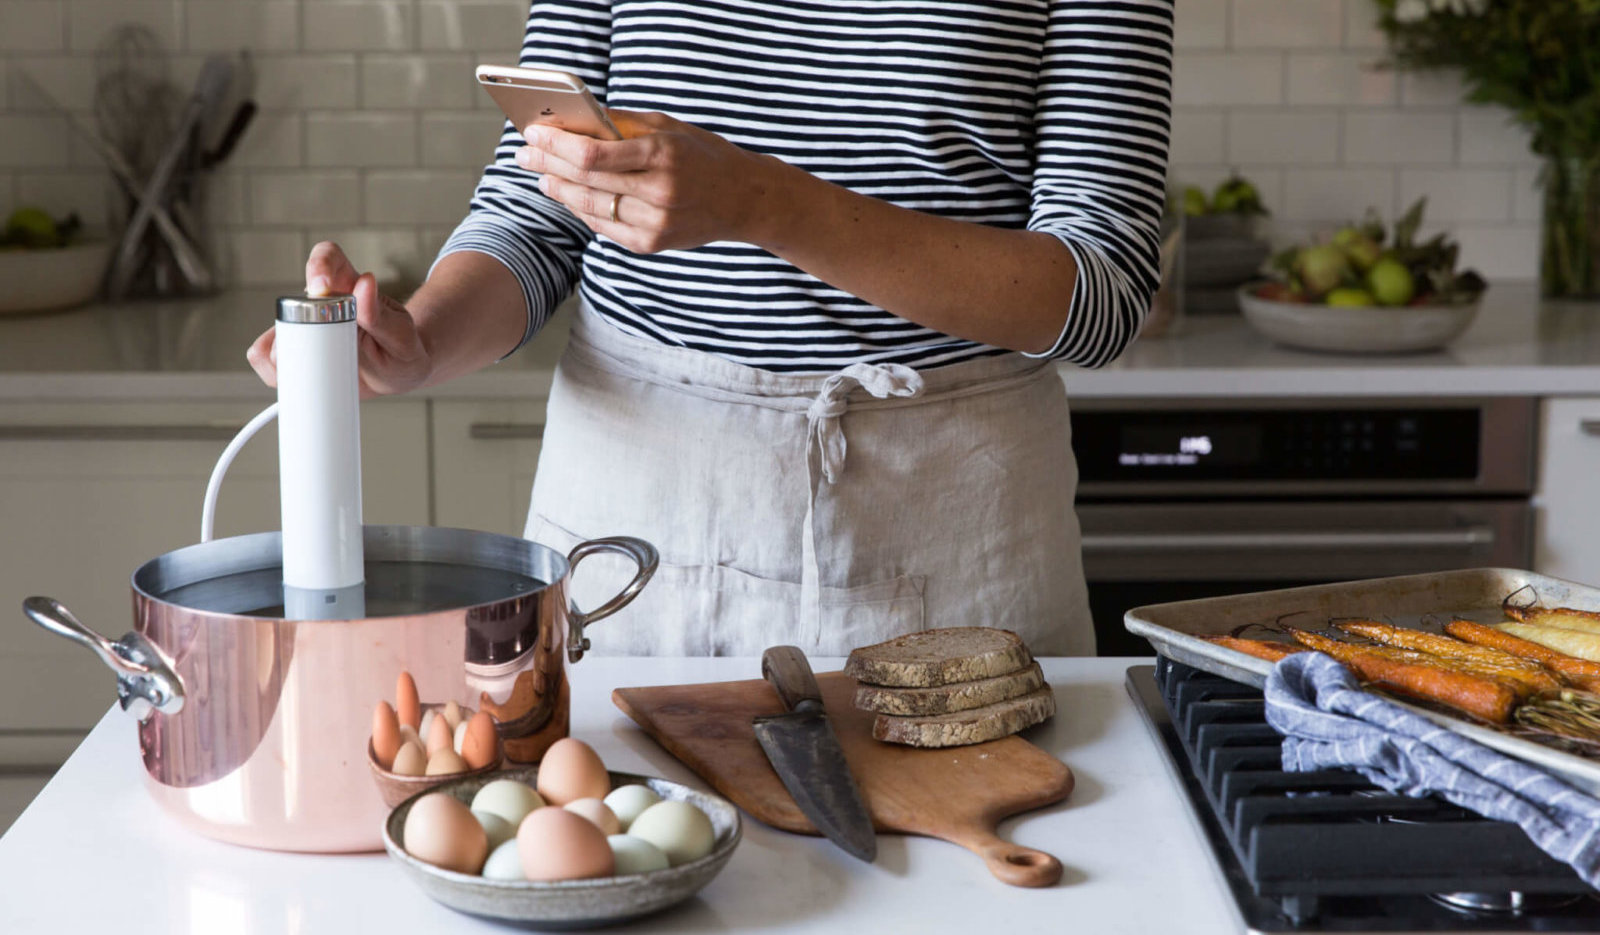 ChefSteps uses Spree Commerce for its content-rich ecommerce platform dedicated to smart cooking